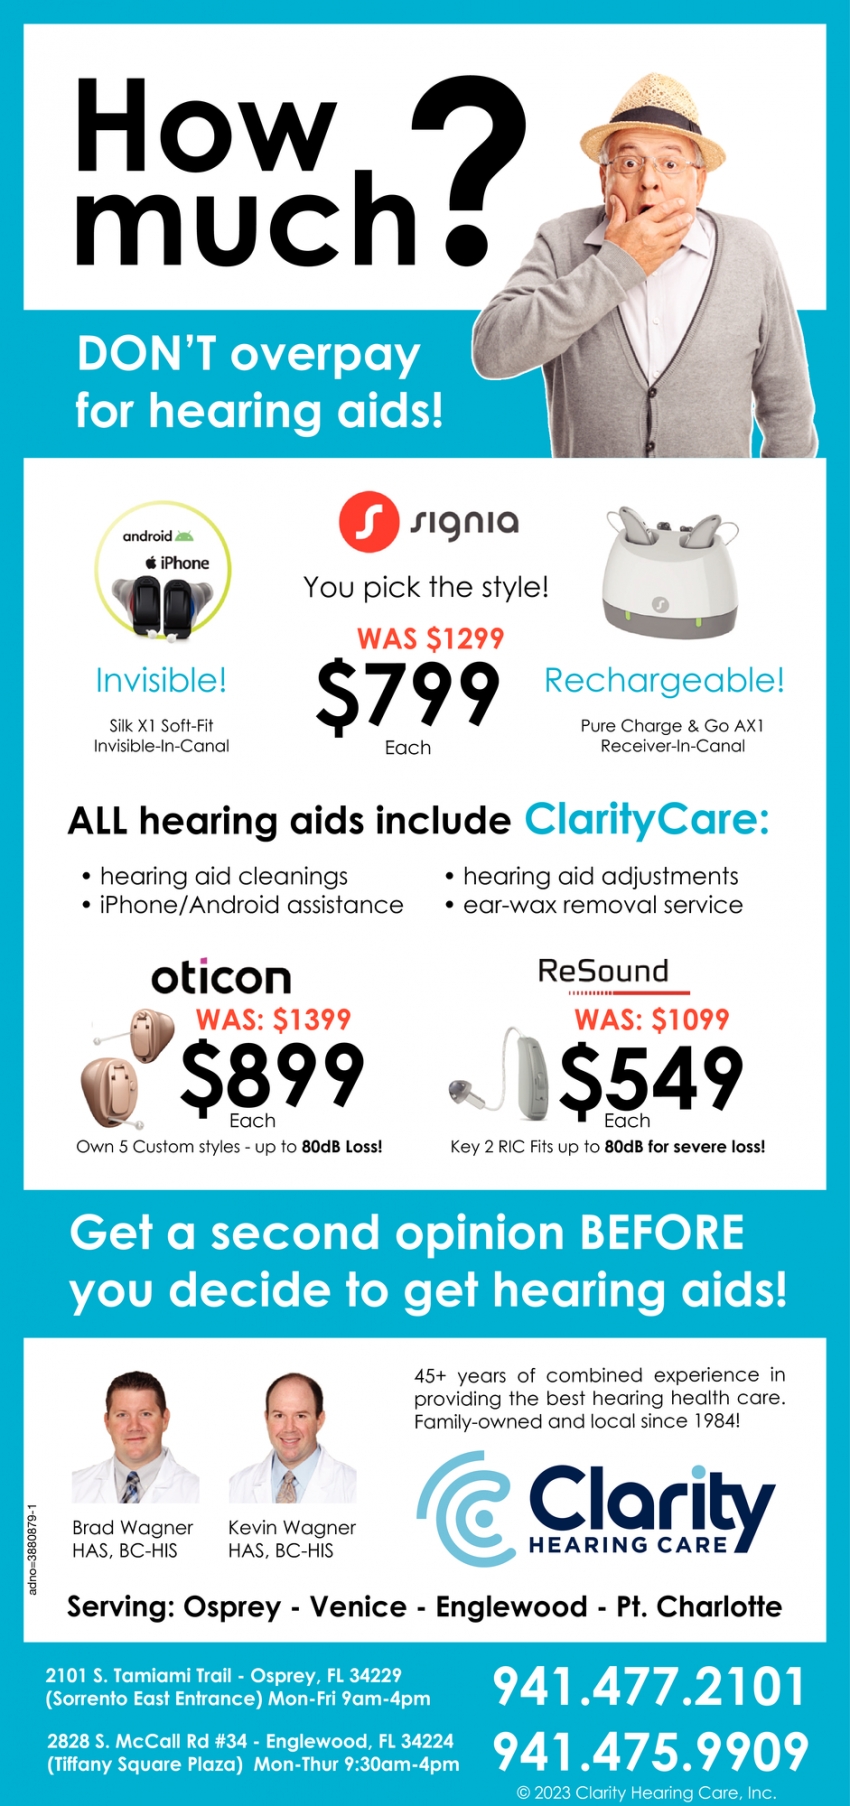 Don't Overpay for Hearing Aids!